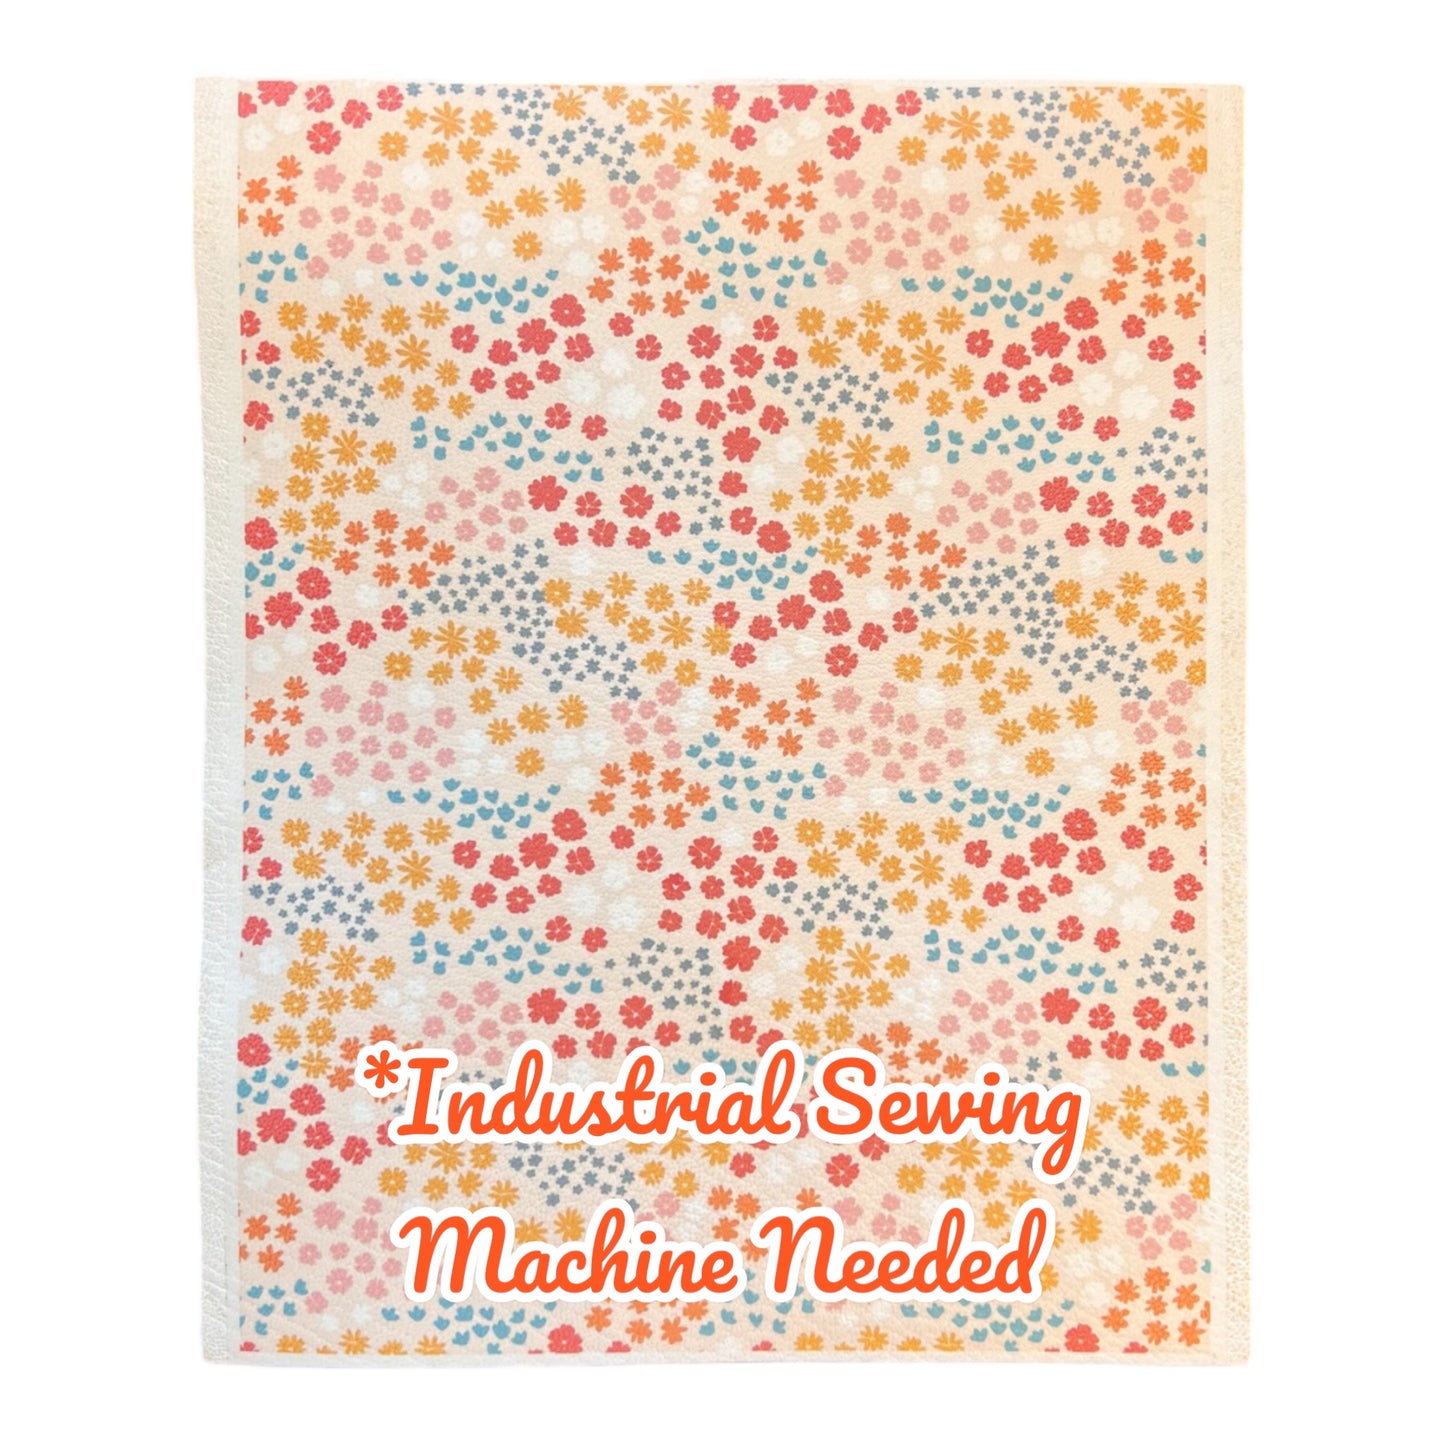 Summer Floral 8 1/2" By 11" Leatherific Crafting Leather Sheet Veg Tan